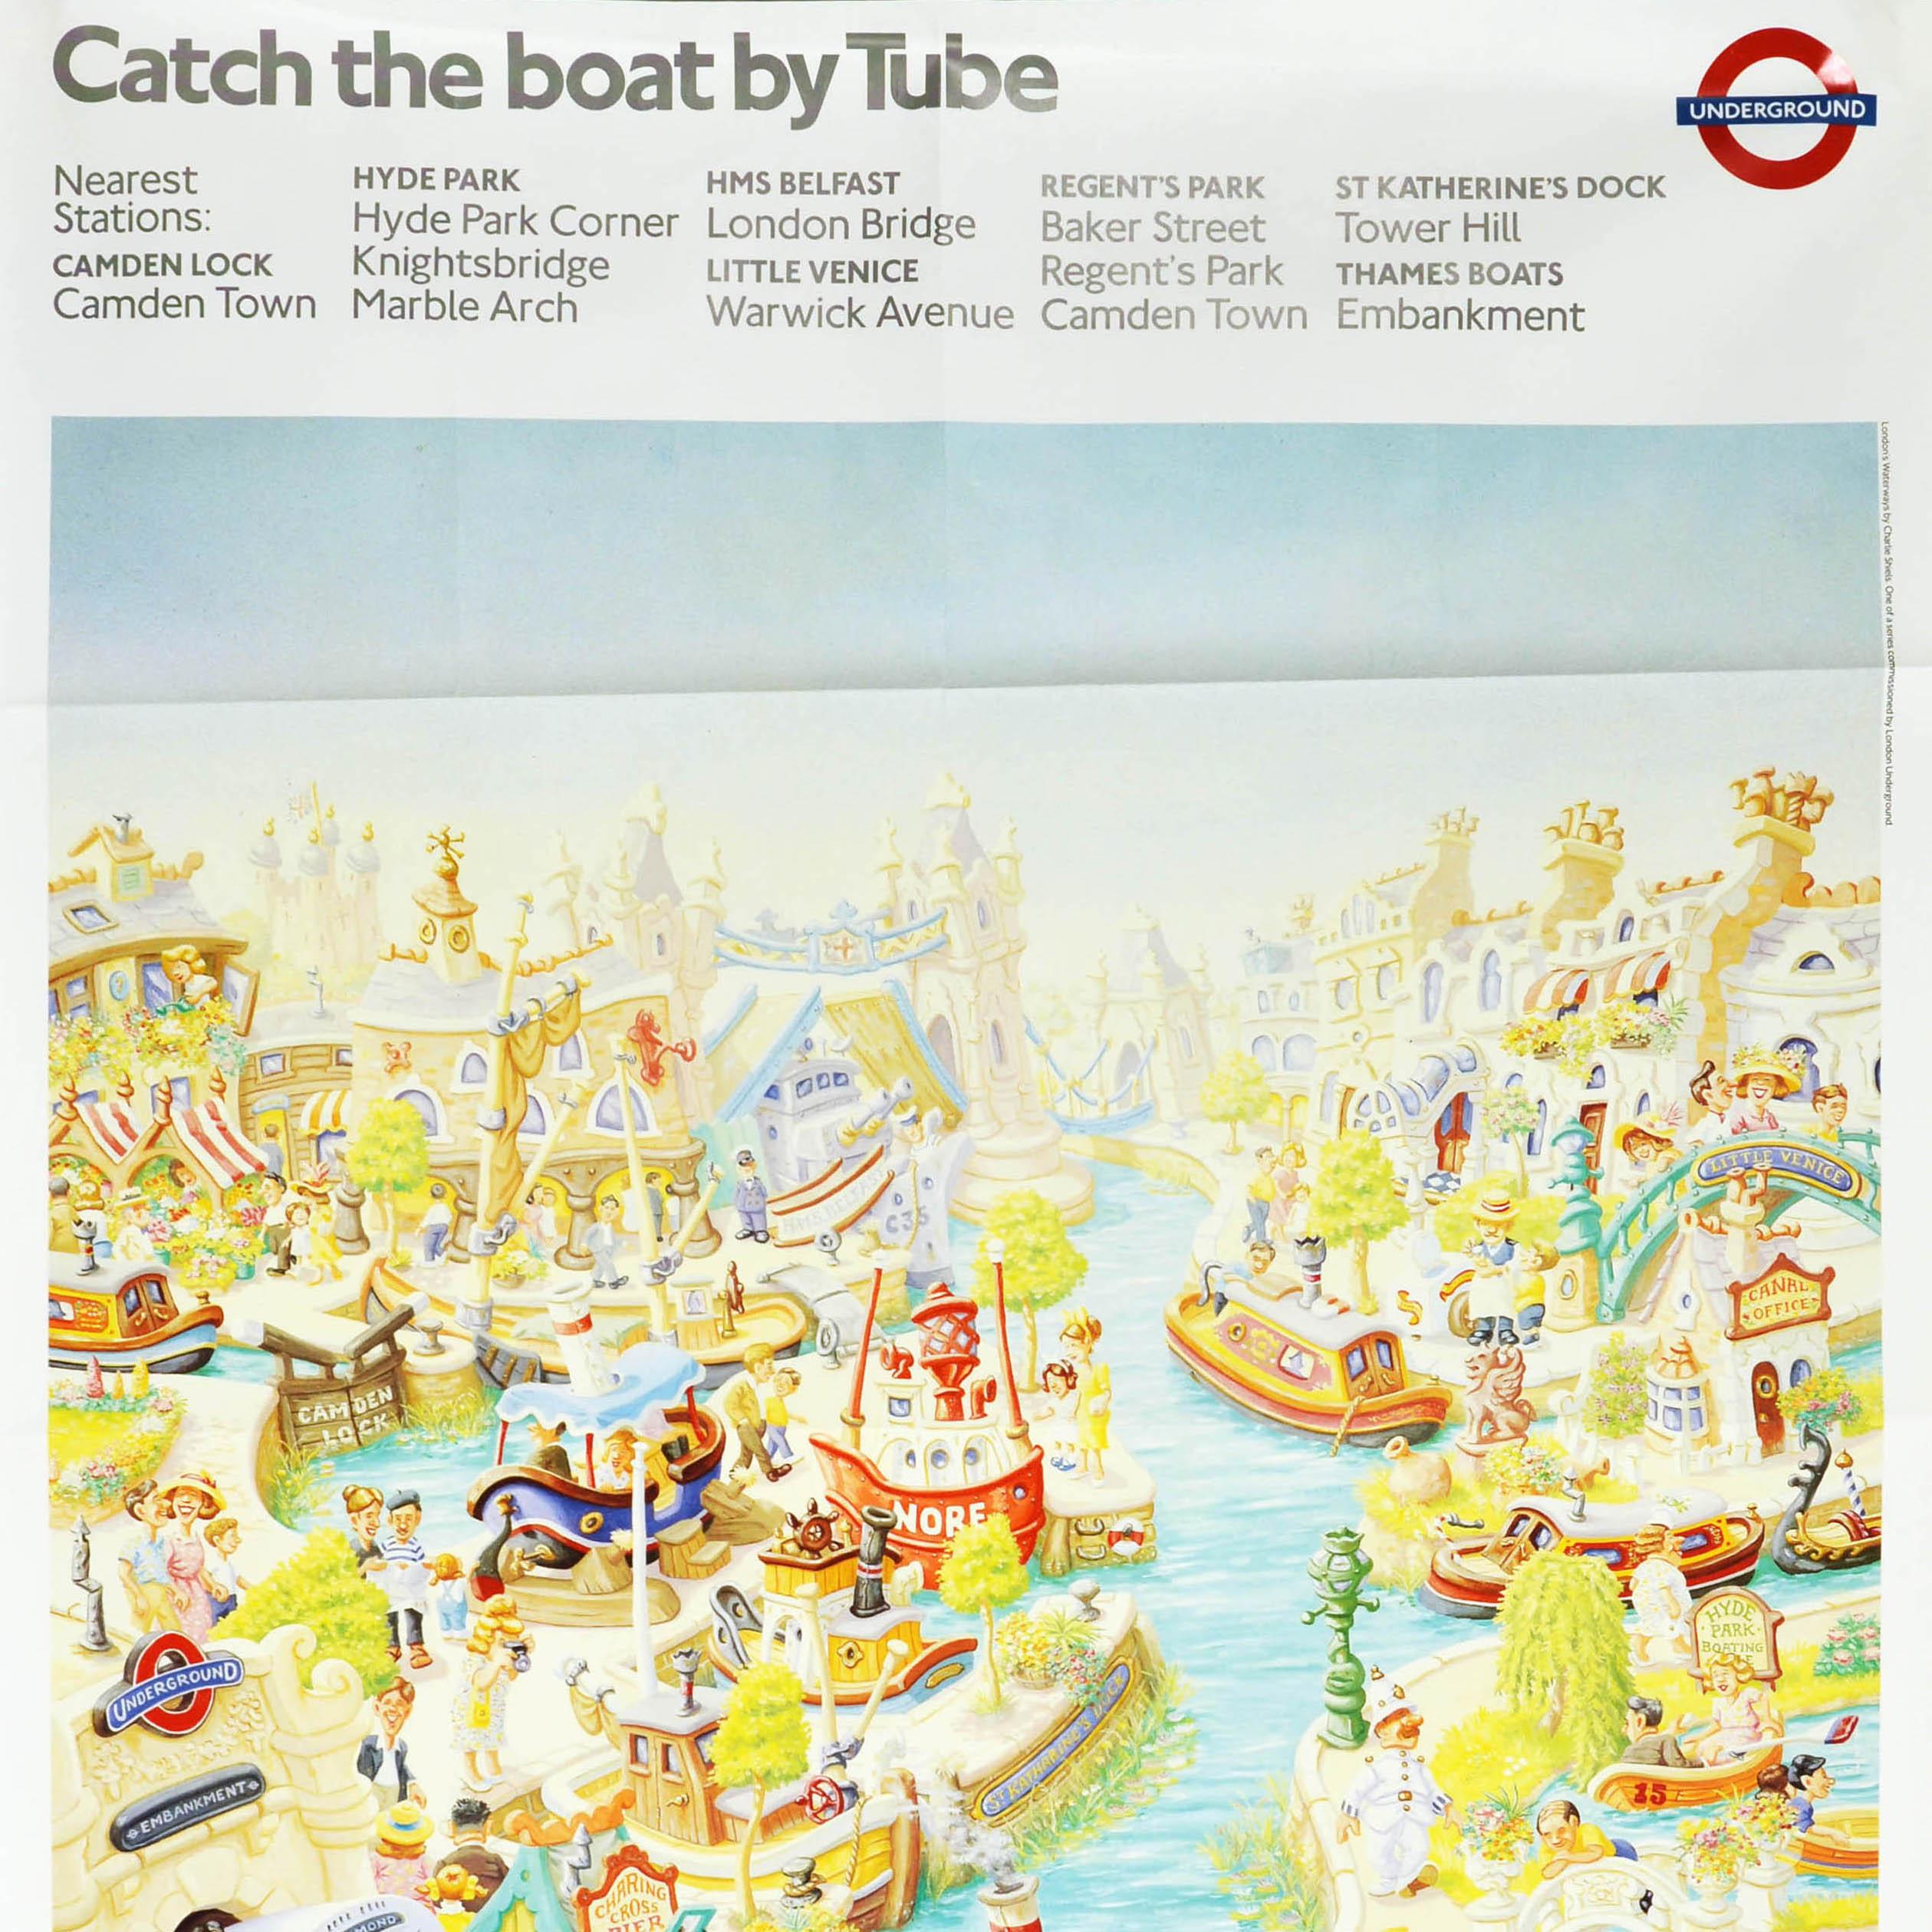 British Original Vintage London Underground Poster Catch The Boat By Tube Thames Design For Sale